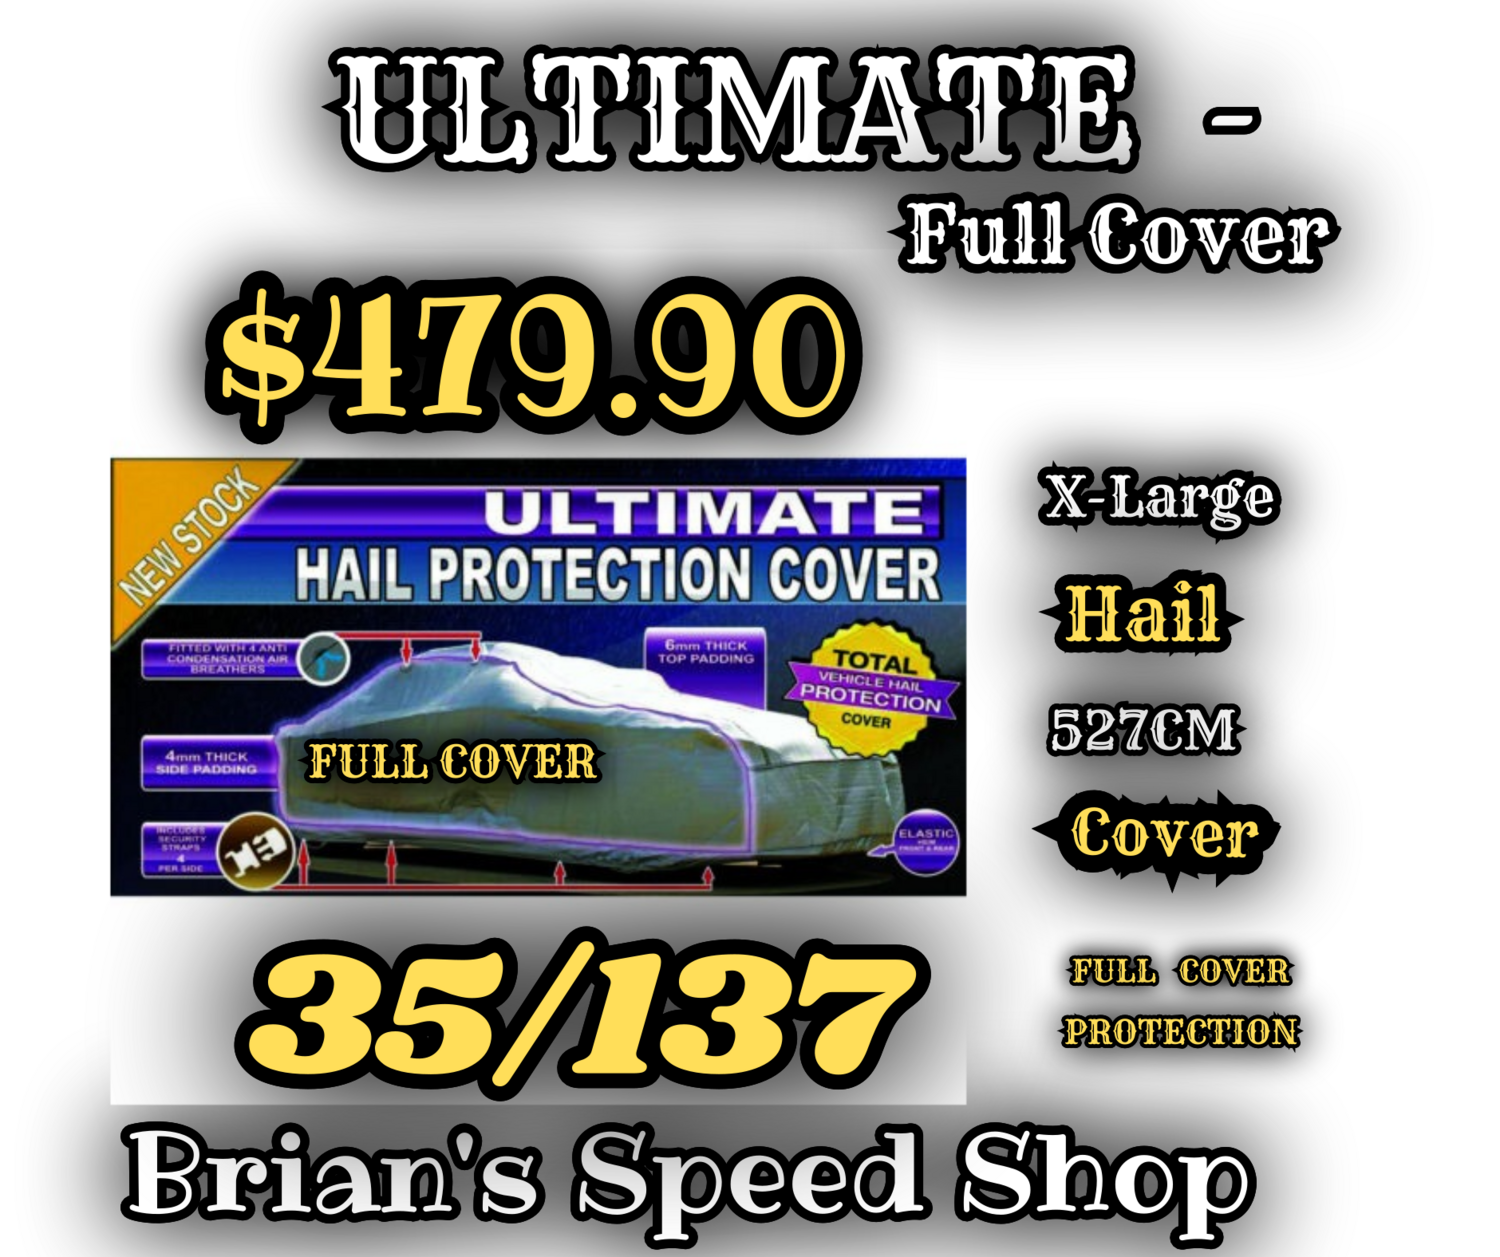 Autotecnica  Ultimate Hail Protection Cover 35/137  X-Large Hail  Cover 527 cm.   Free Shipping. SKU 506 $ 479.90